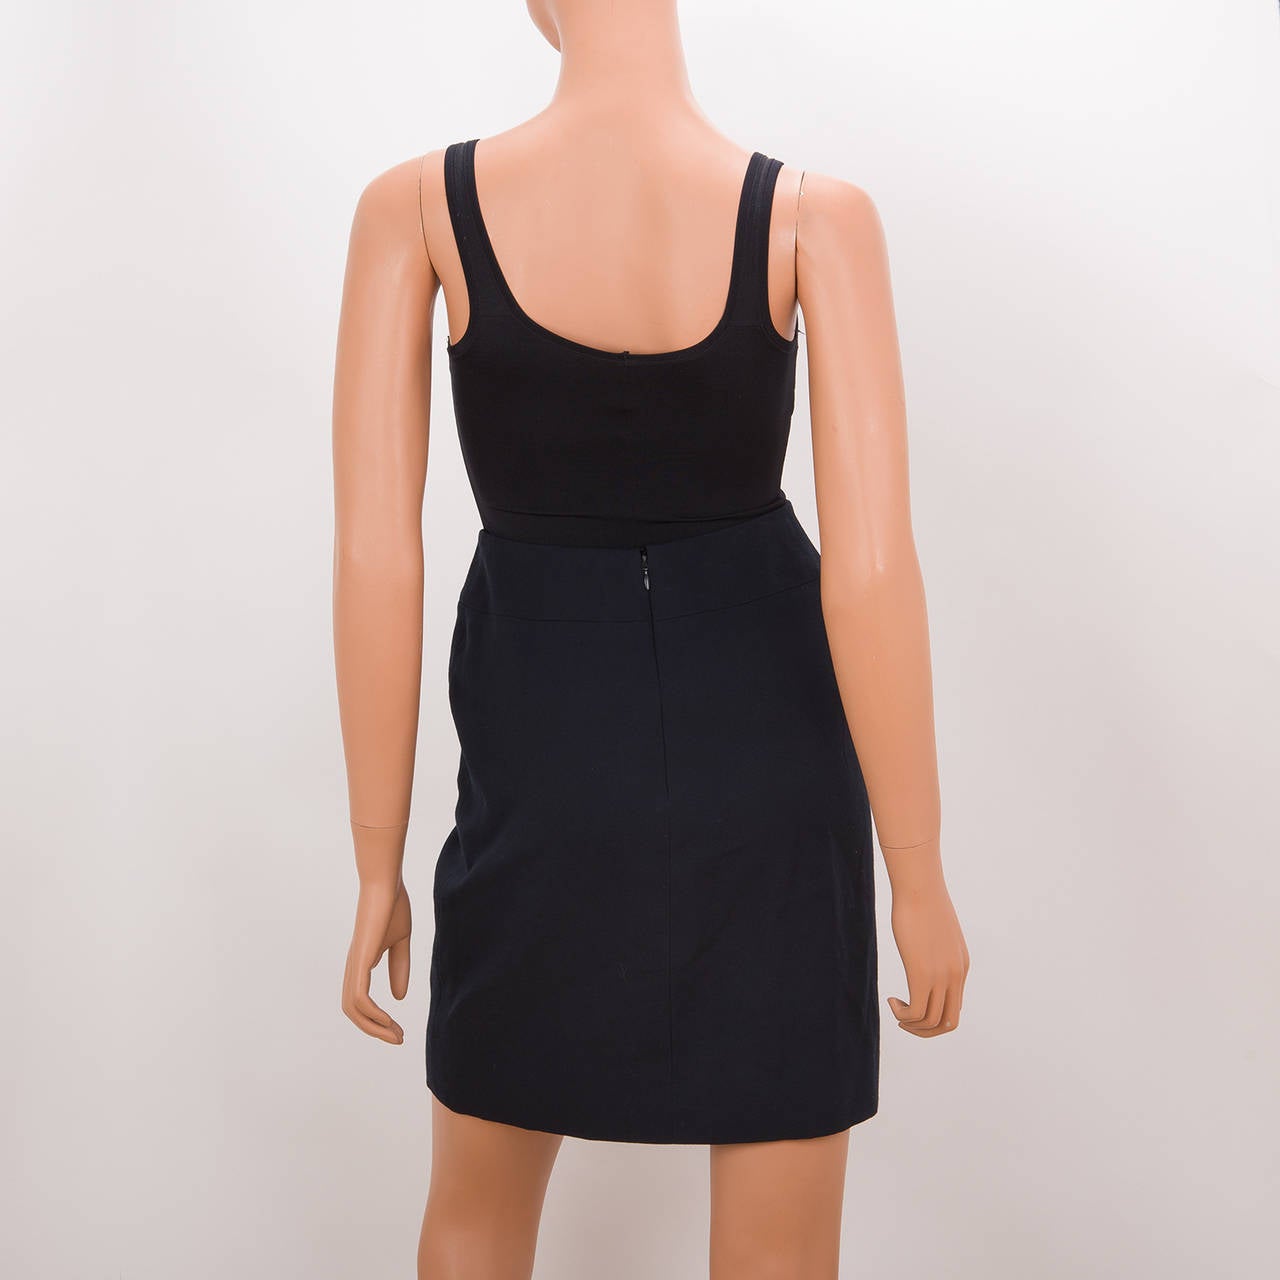 CHANEL Navy Wool Pencil Skirt 38 2 In Excellent Condition For Sale In New York, NY